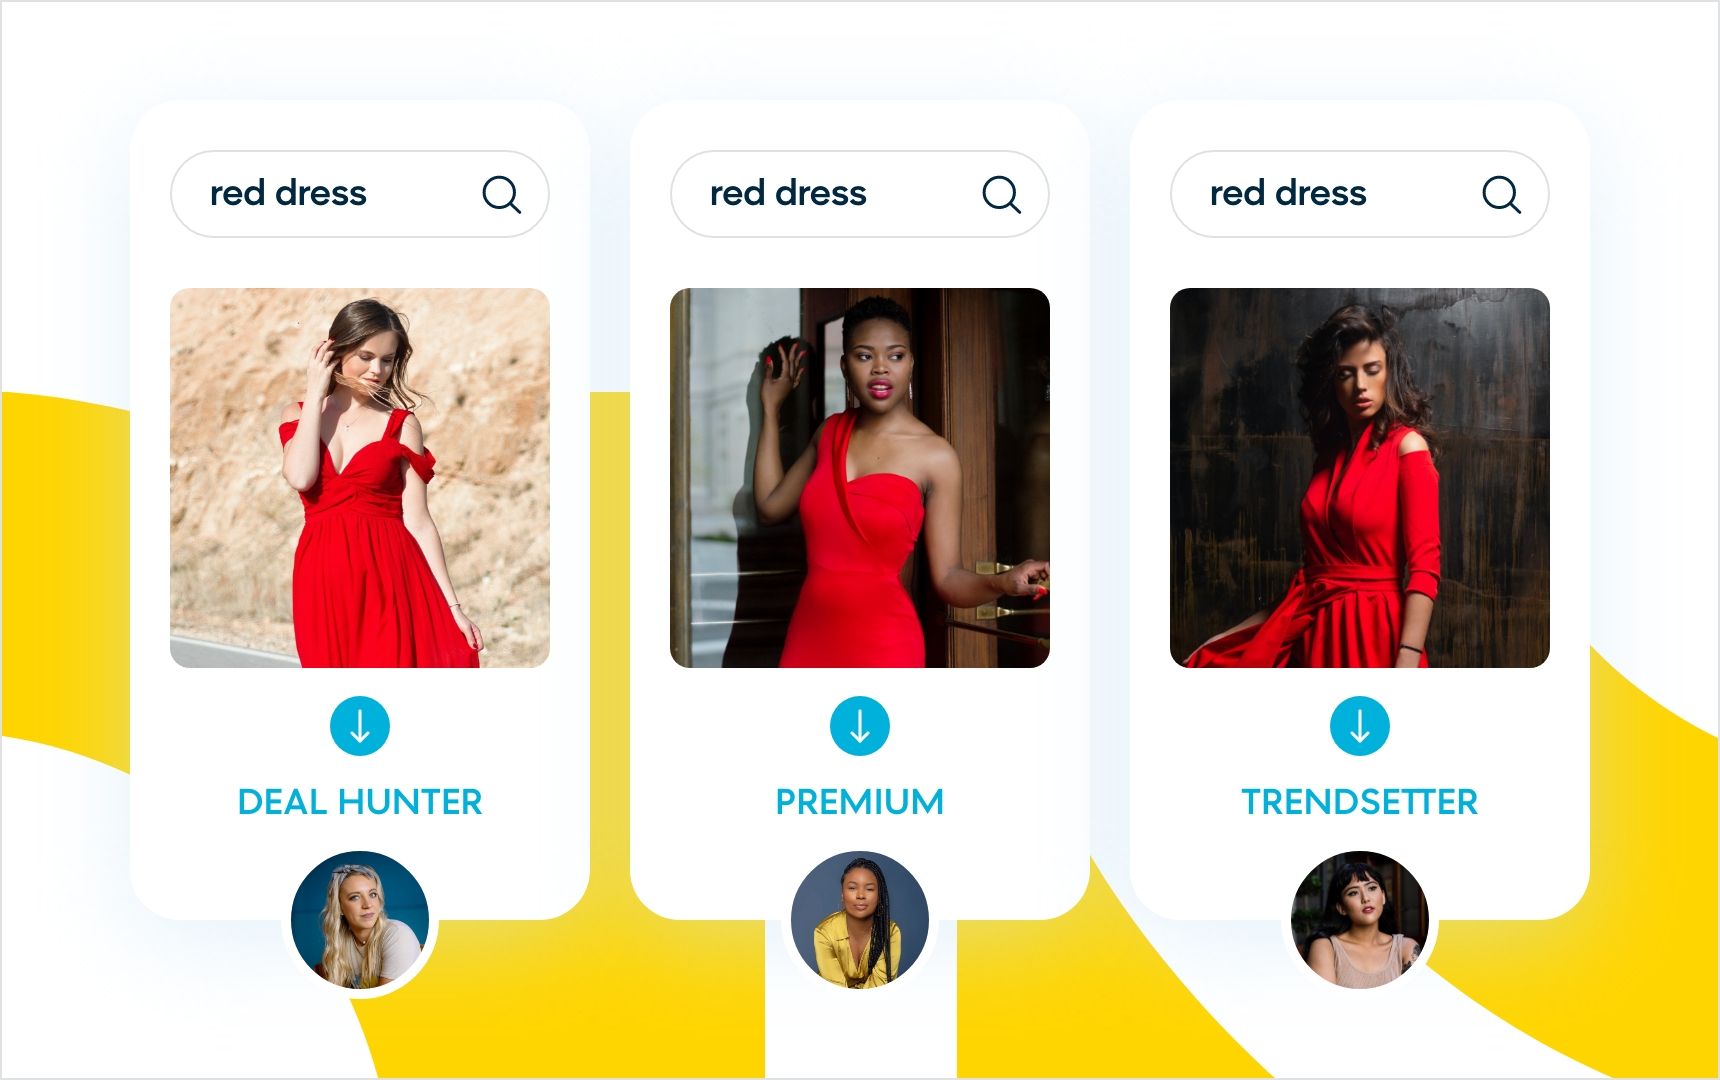 Results for "red dress" based on audience segmentation